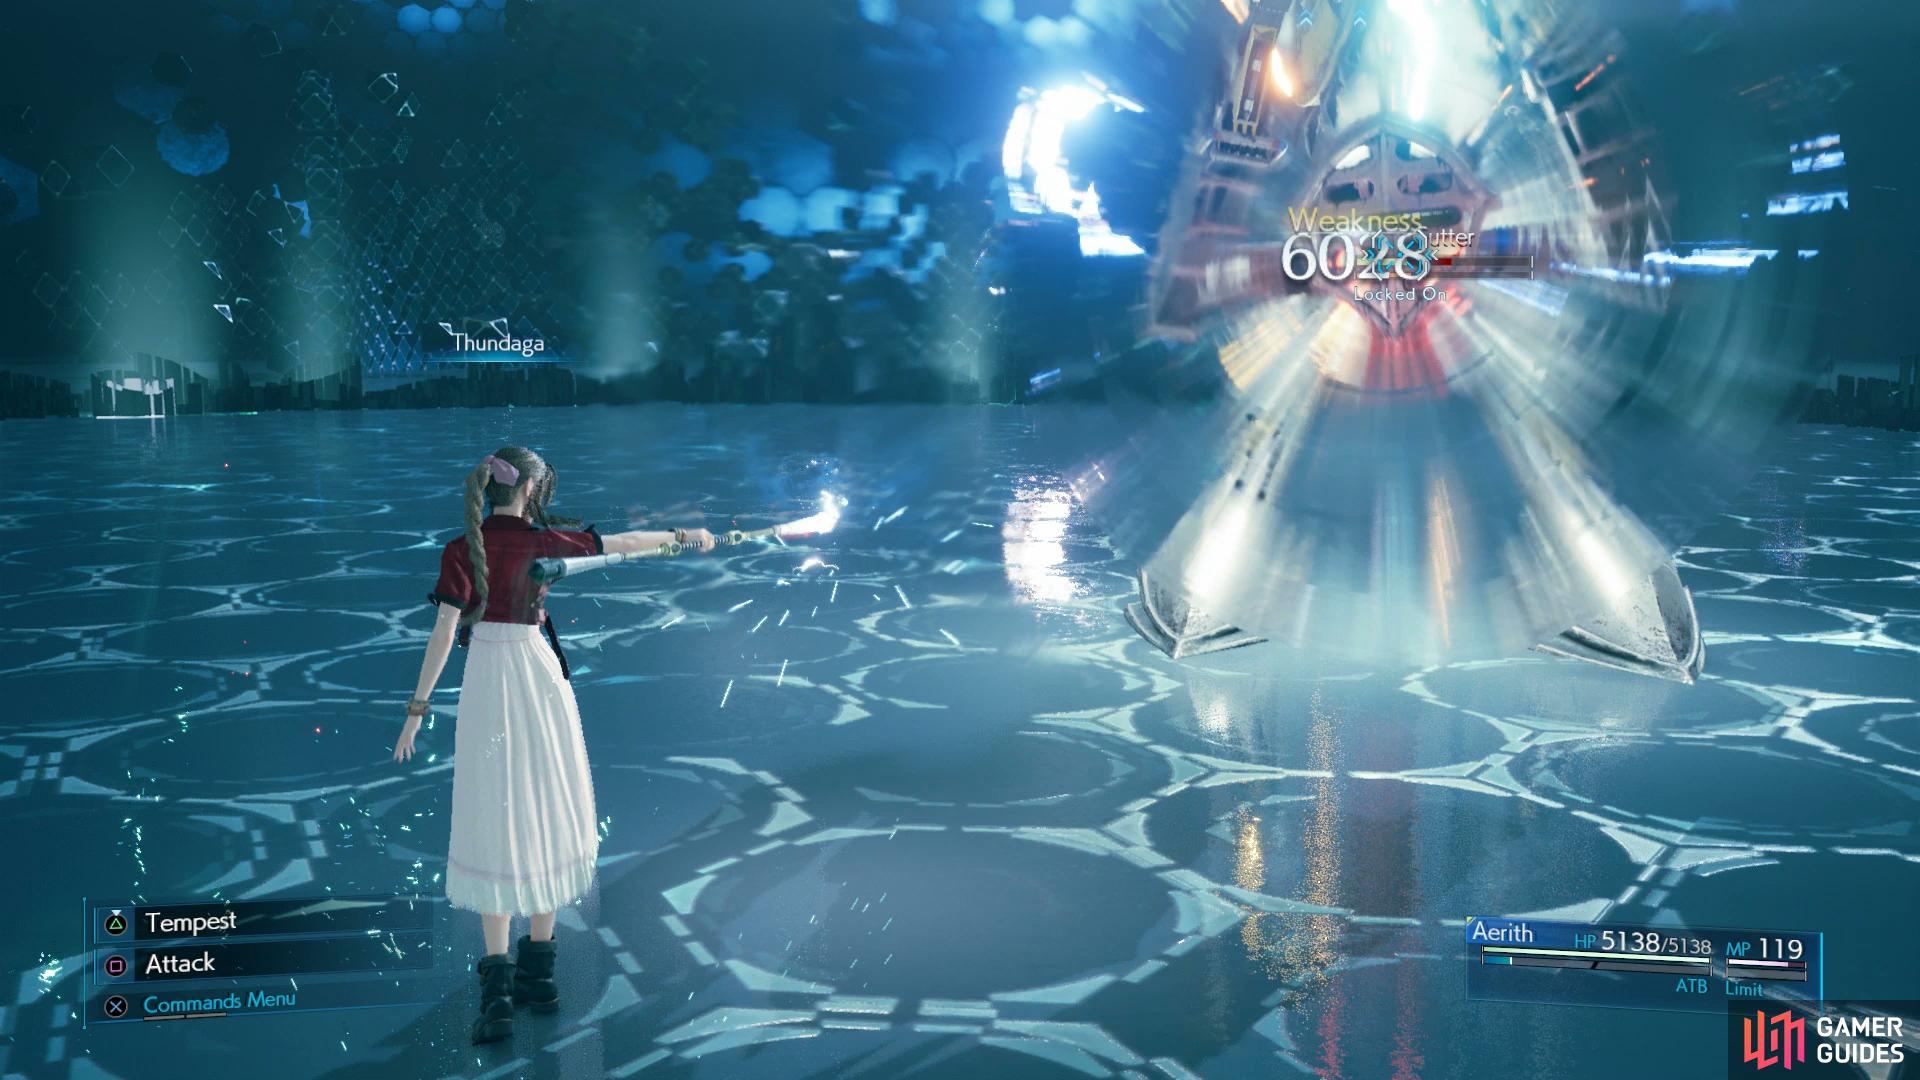 Aerith’s Thunder spells will eat away at Cutter’s HP in no time at all.